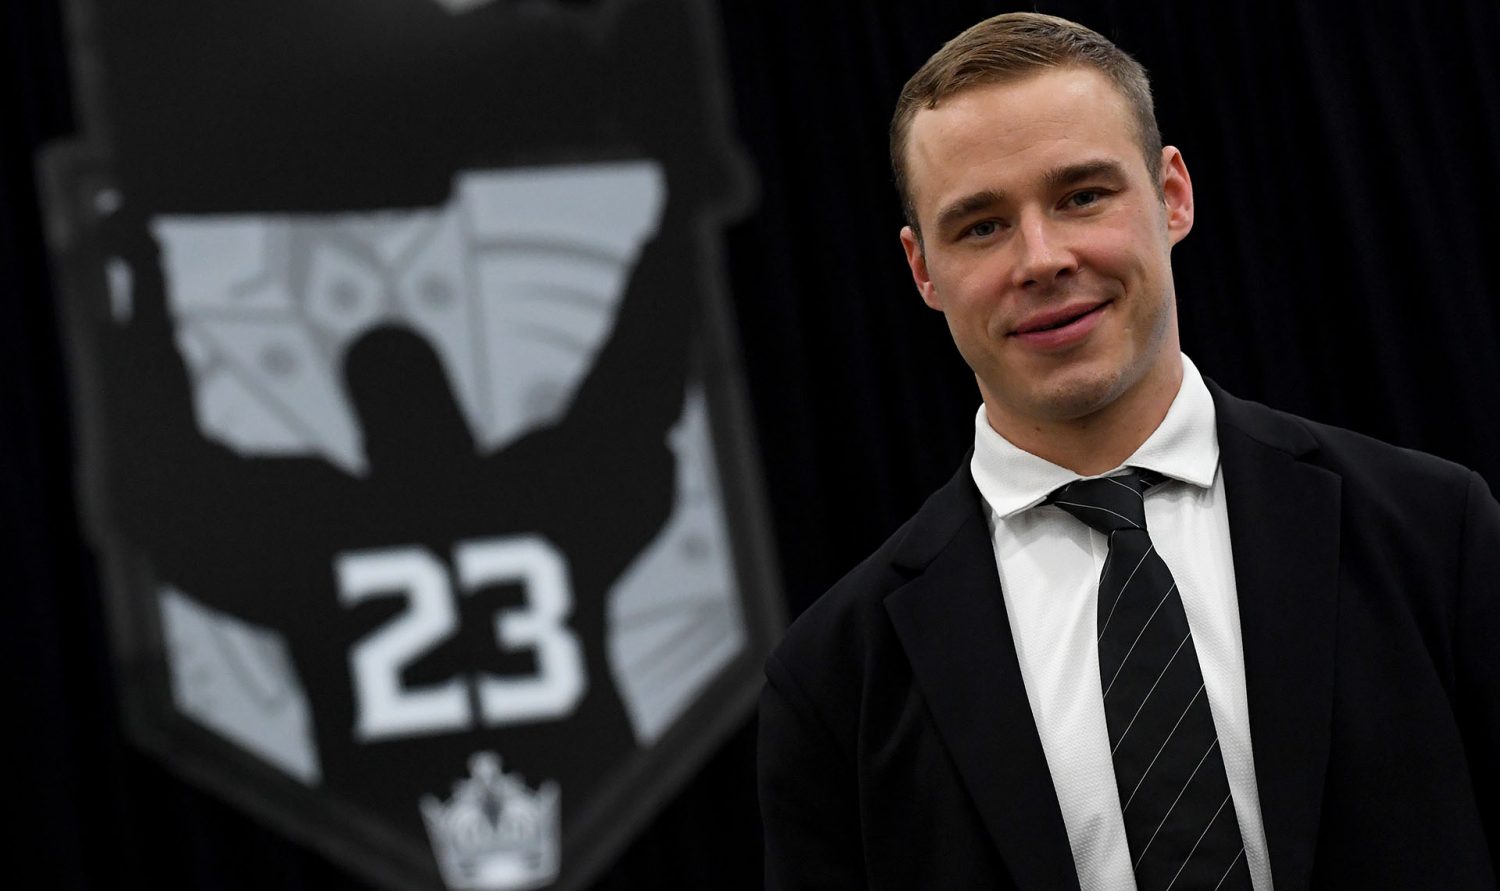 Former King Dustin Brown has No. 23 retired, statue unveiled